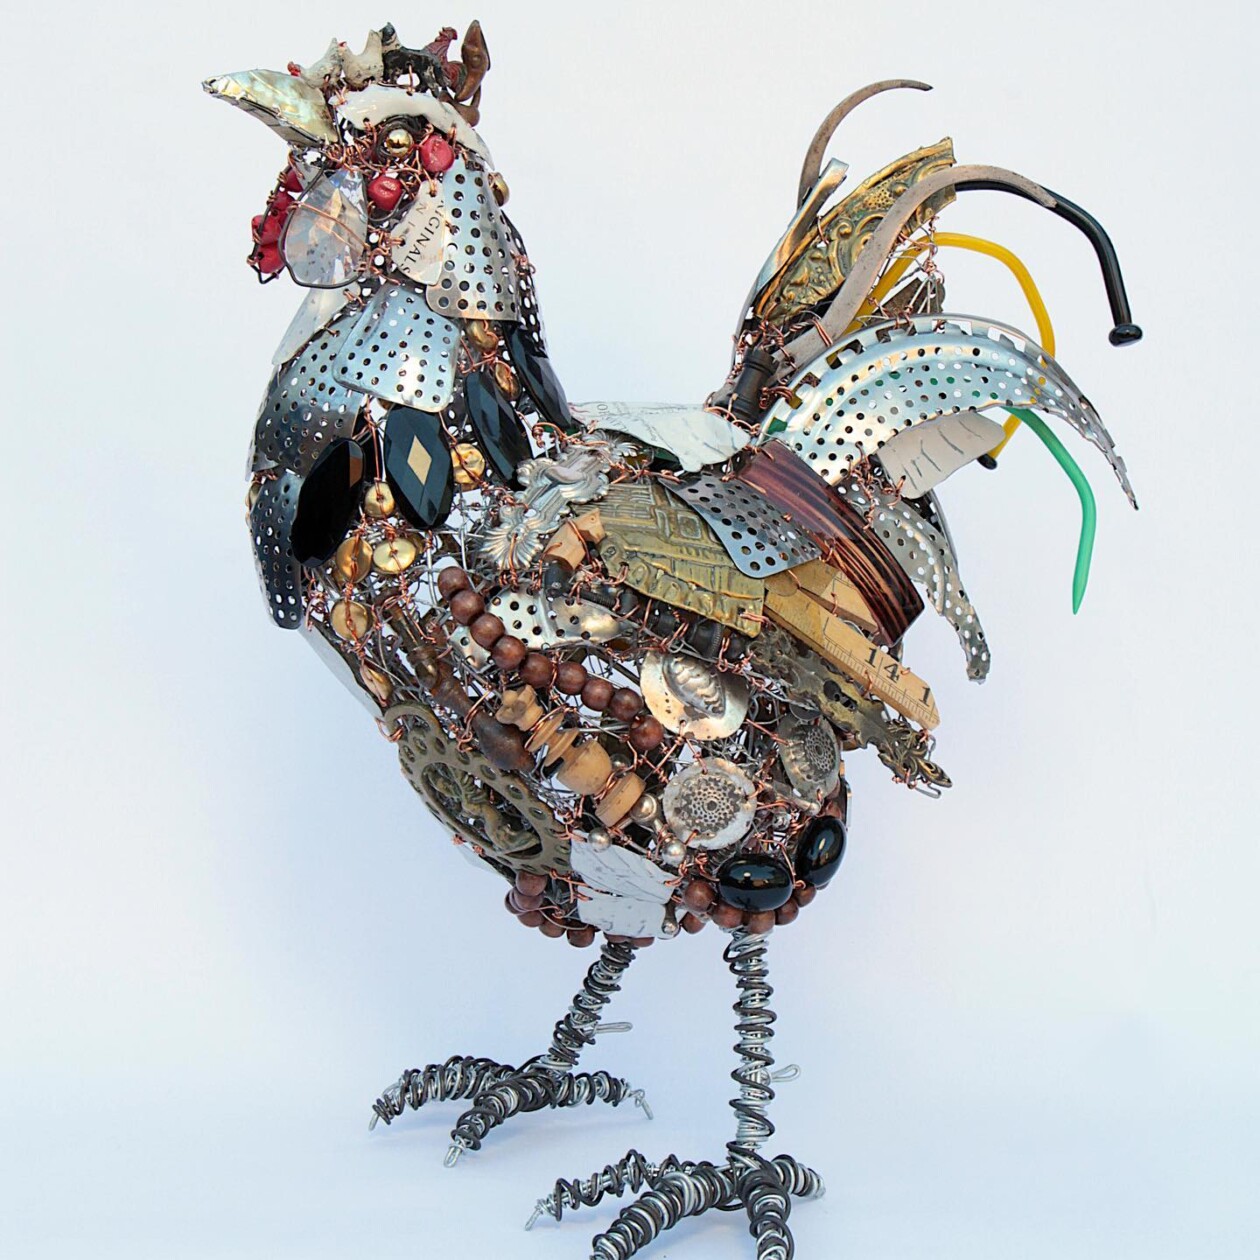 Bird Sculptures Made From Recycled Metal Scraps By Barbara Franc (4)